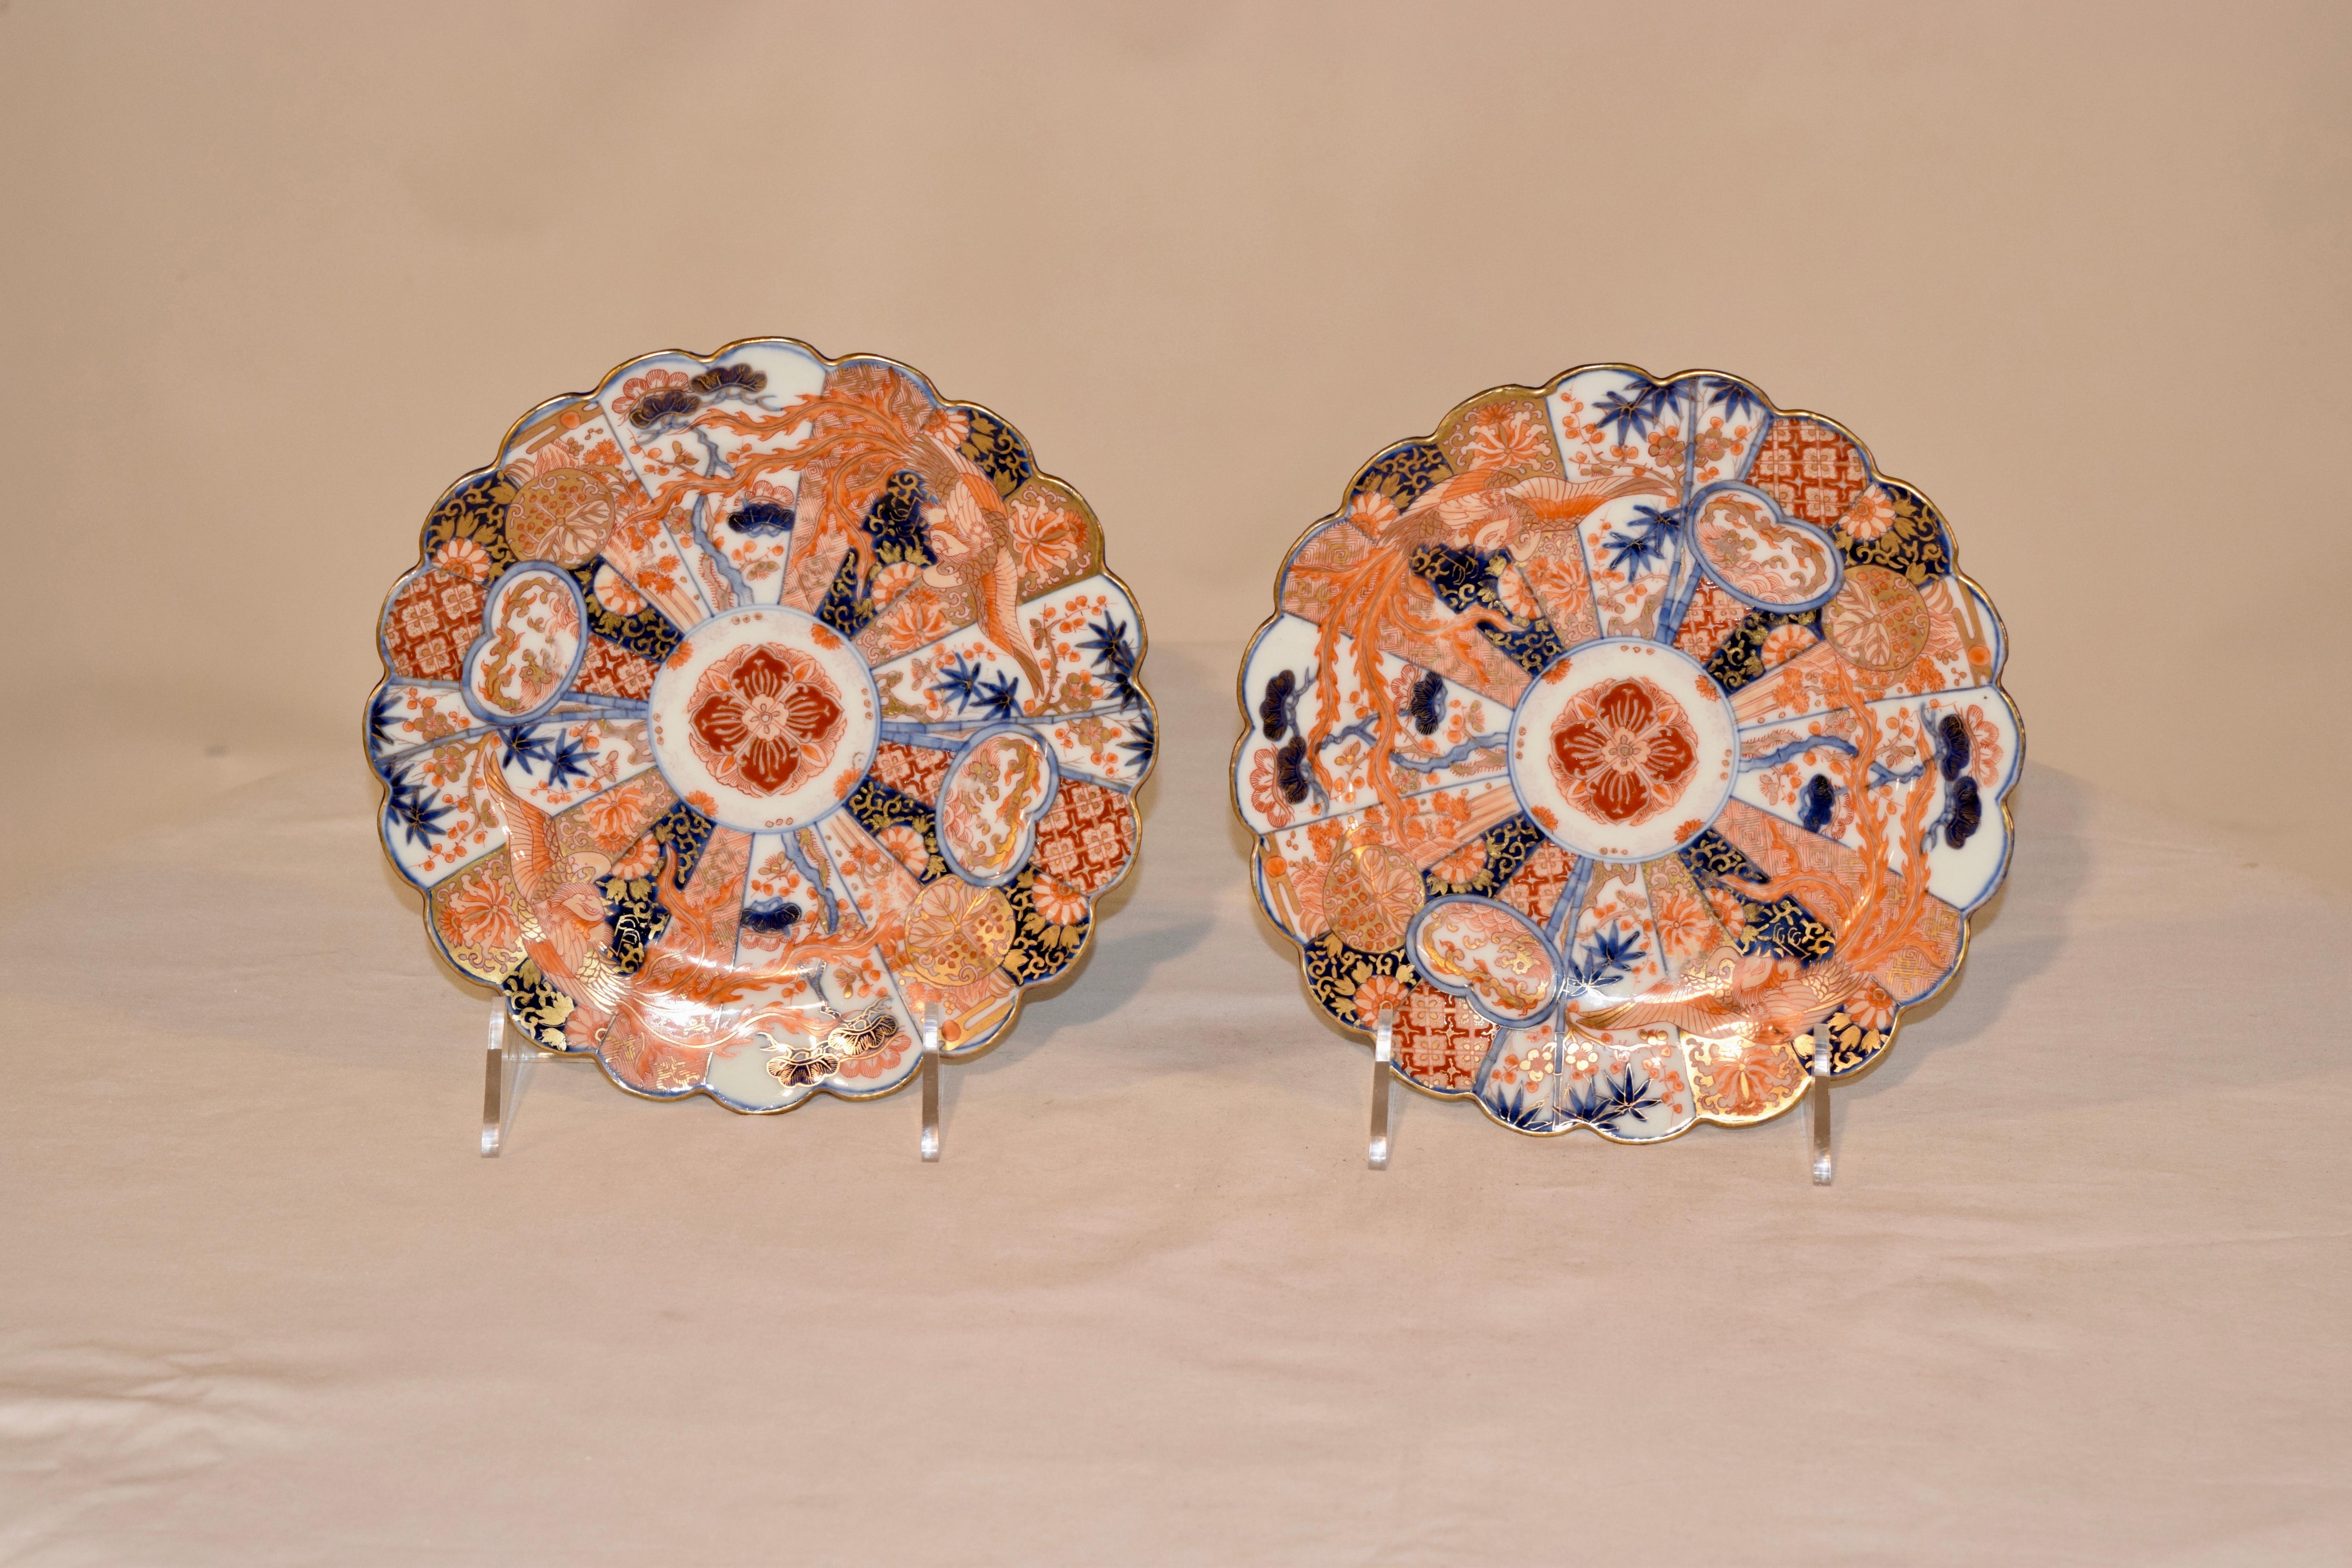 Pair of 19th century Imari plates with scalloped borders that are gilded and have a central medallion with a fan pattern surrounding it, all hand painted with florals and patterns in shades of red, rust, orange and blue. Gorgeous pattern.